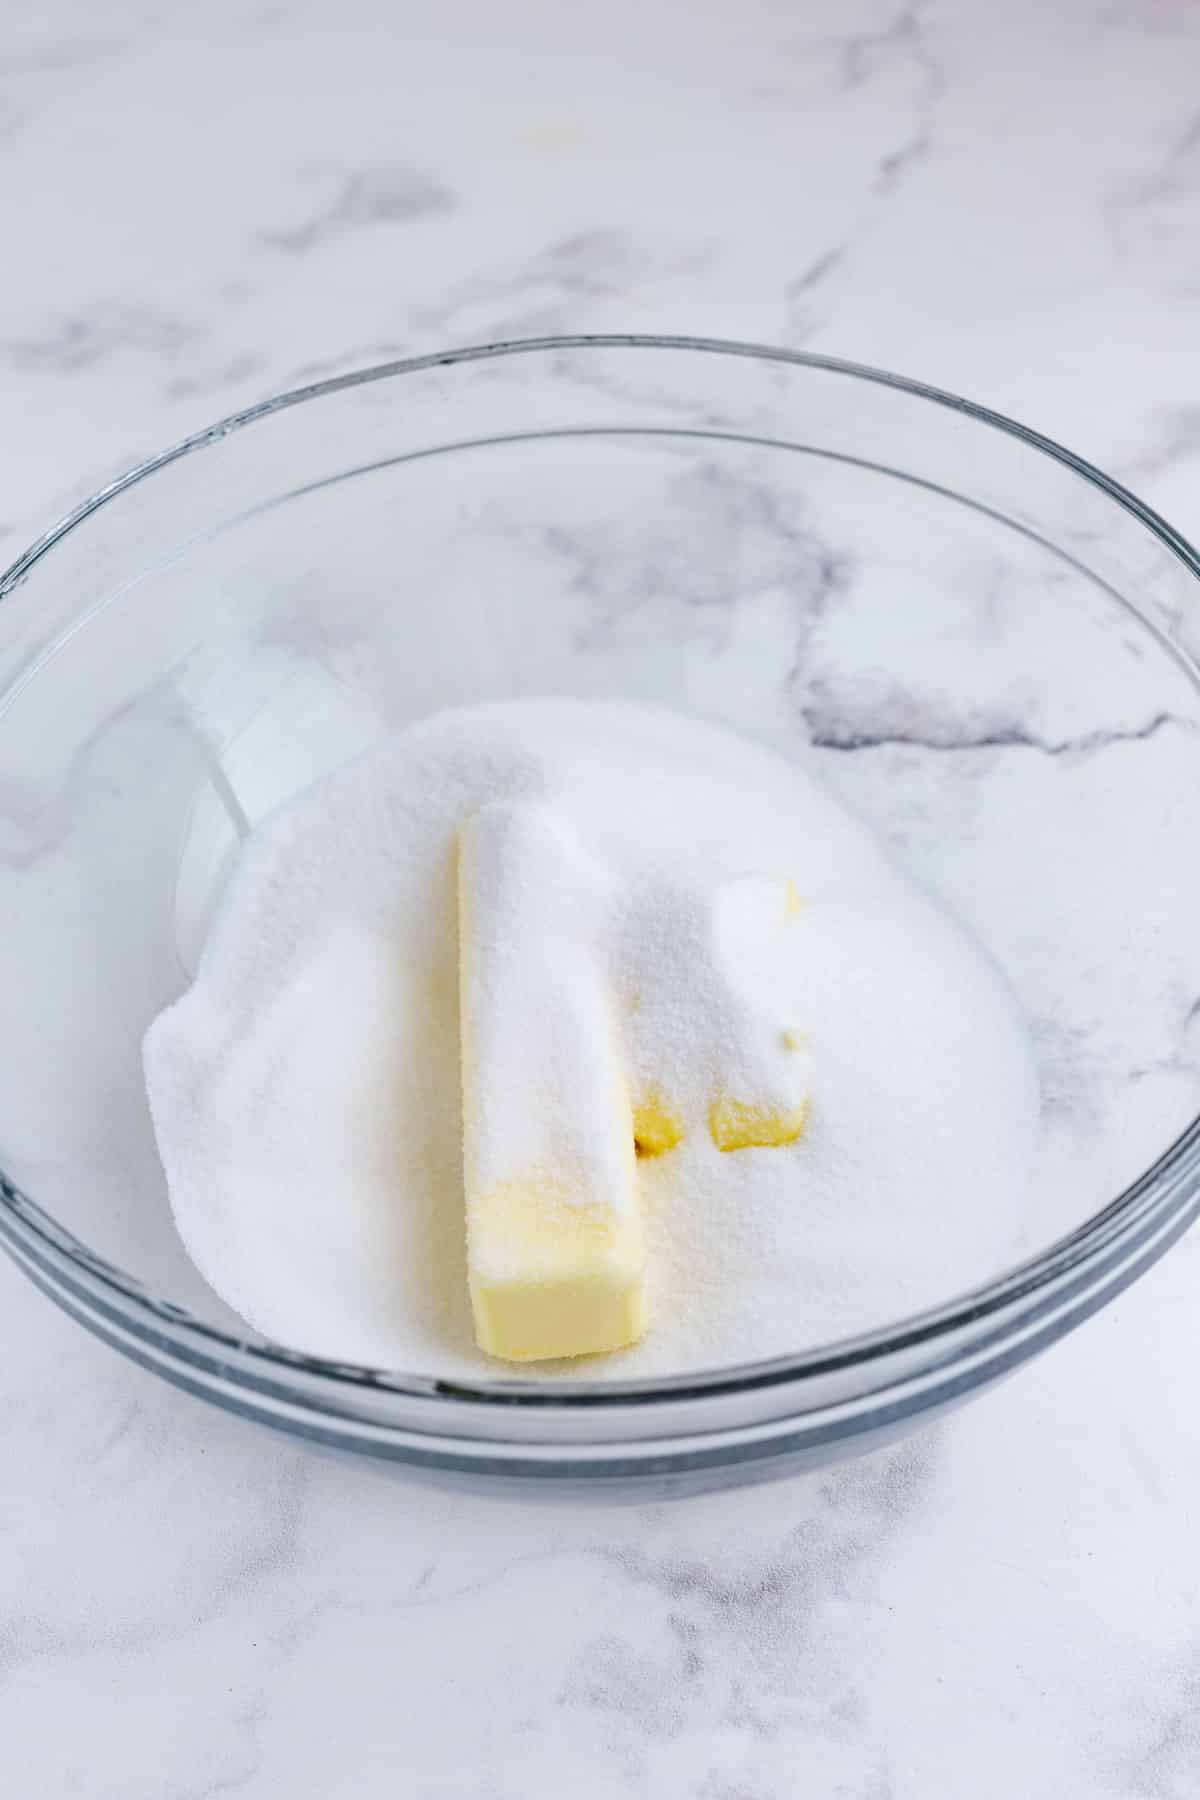 Butter and sugar are added to a bowl.